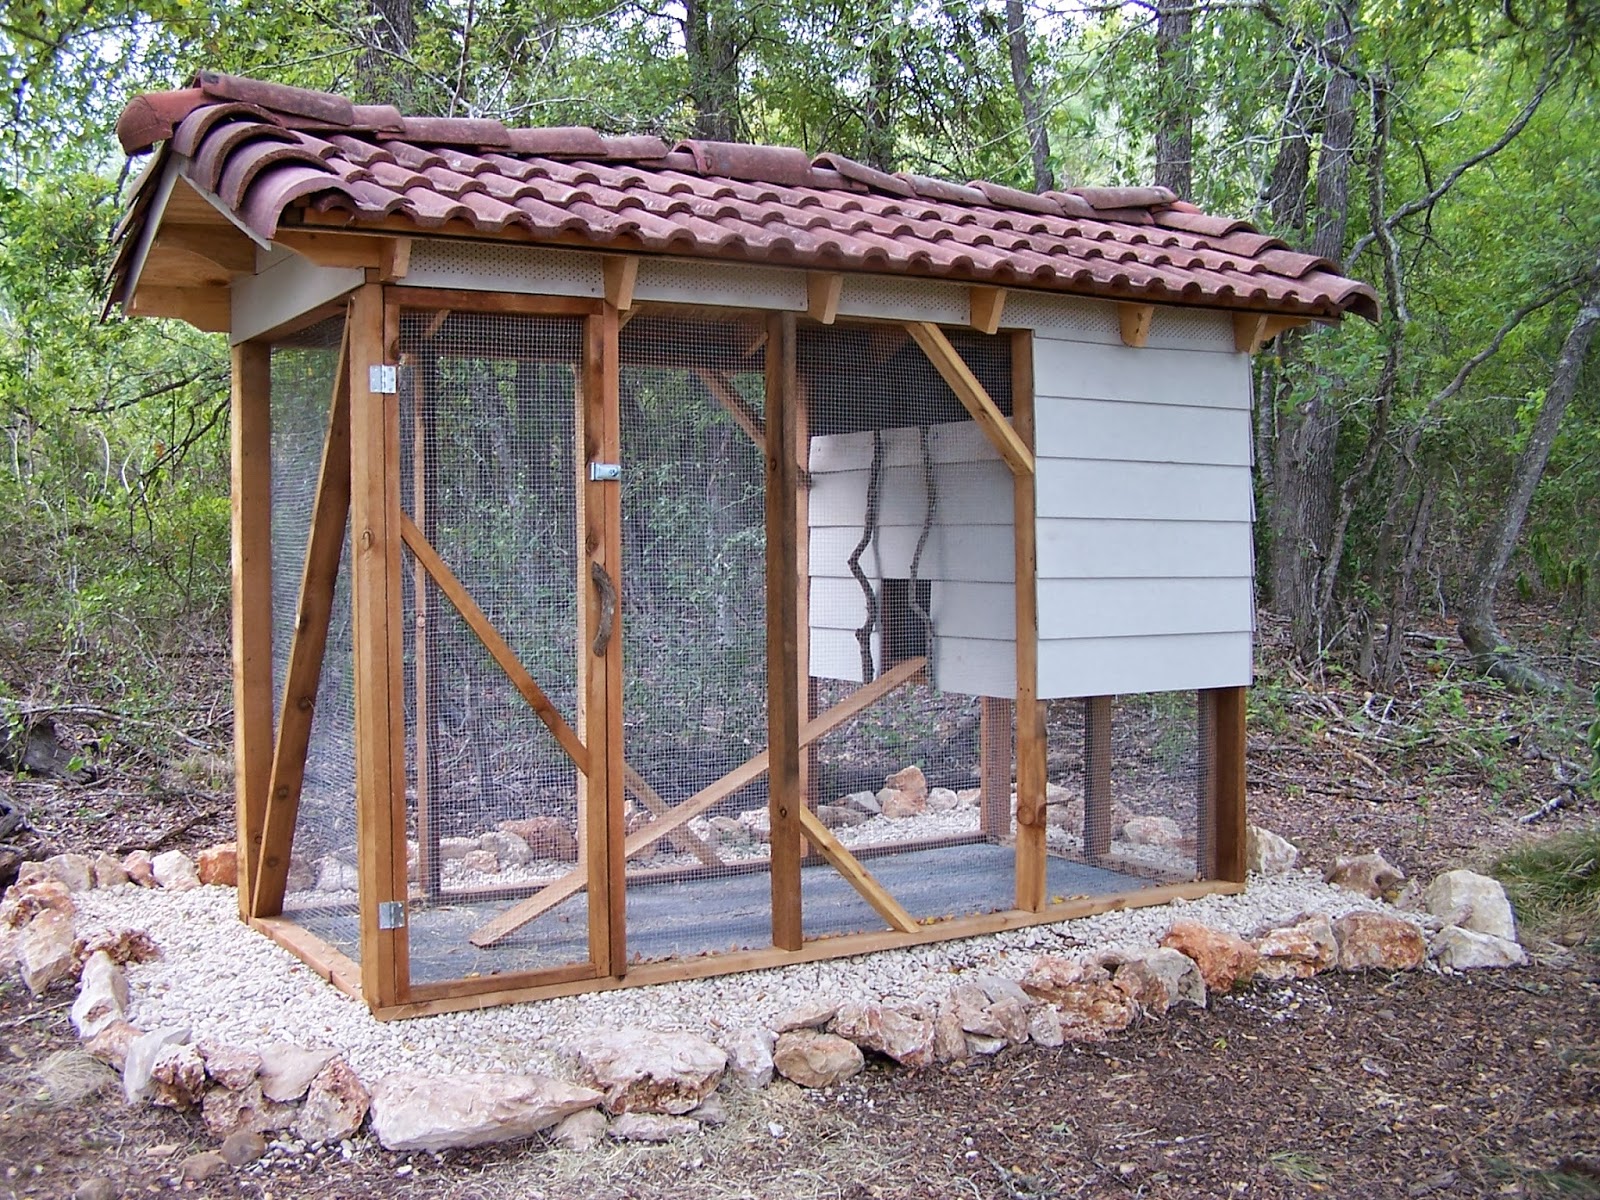 Chicken House Plans: Get the Best Chicken Coop Plans Available - Simple Chicken Coop Designs14